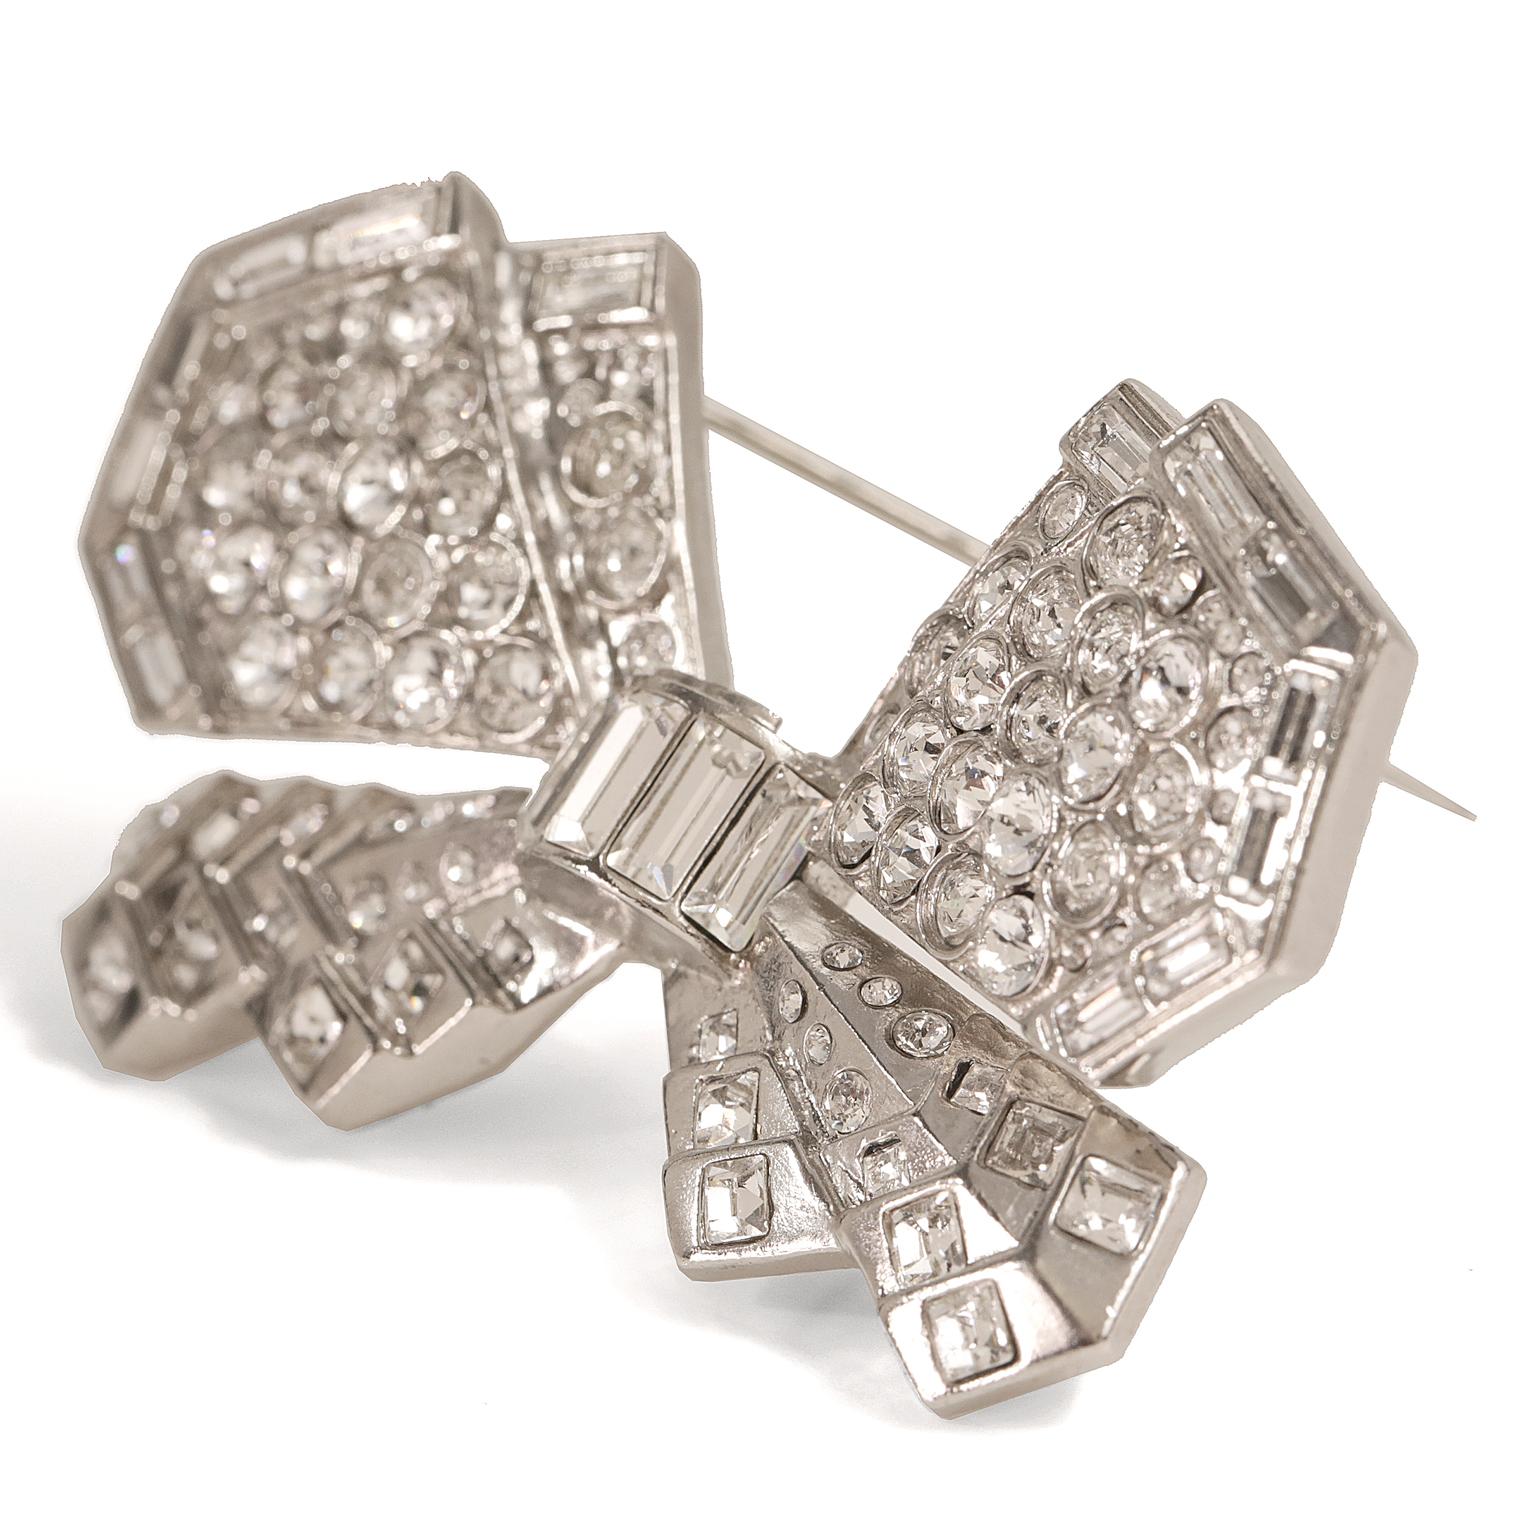 Chanel Crystal Butterfly Brooch - excellent condition
  Art Deco style, silver tone hardware.  Approximately 3” x 1.5”
